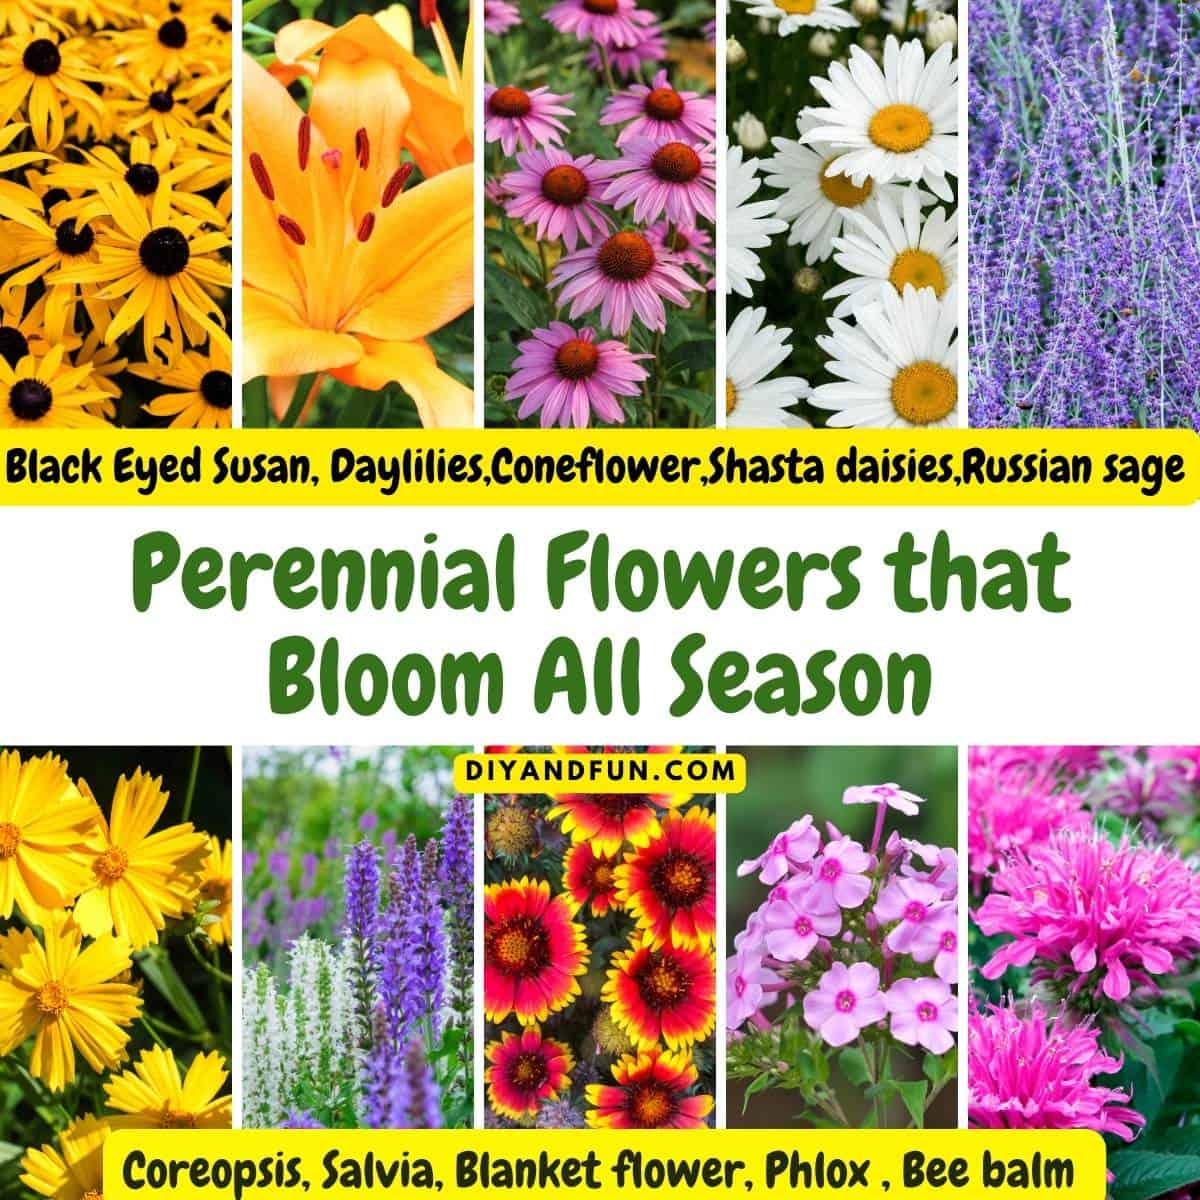 Perennial Flowers that Bloom All Season, a simple guide for selecting, planting, and caring for beautiful flowers that return the next year.